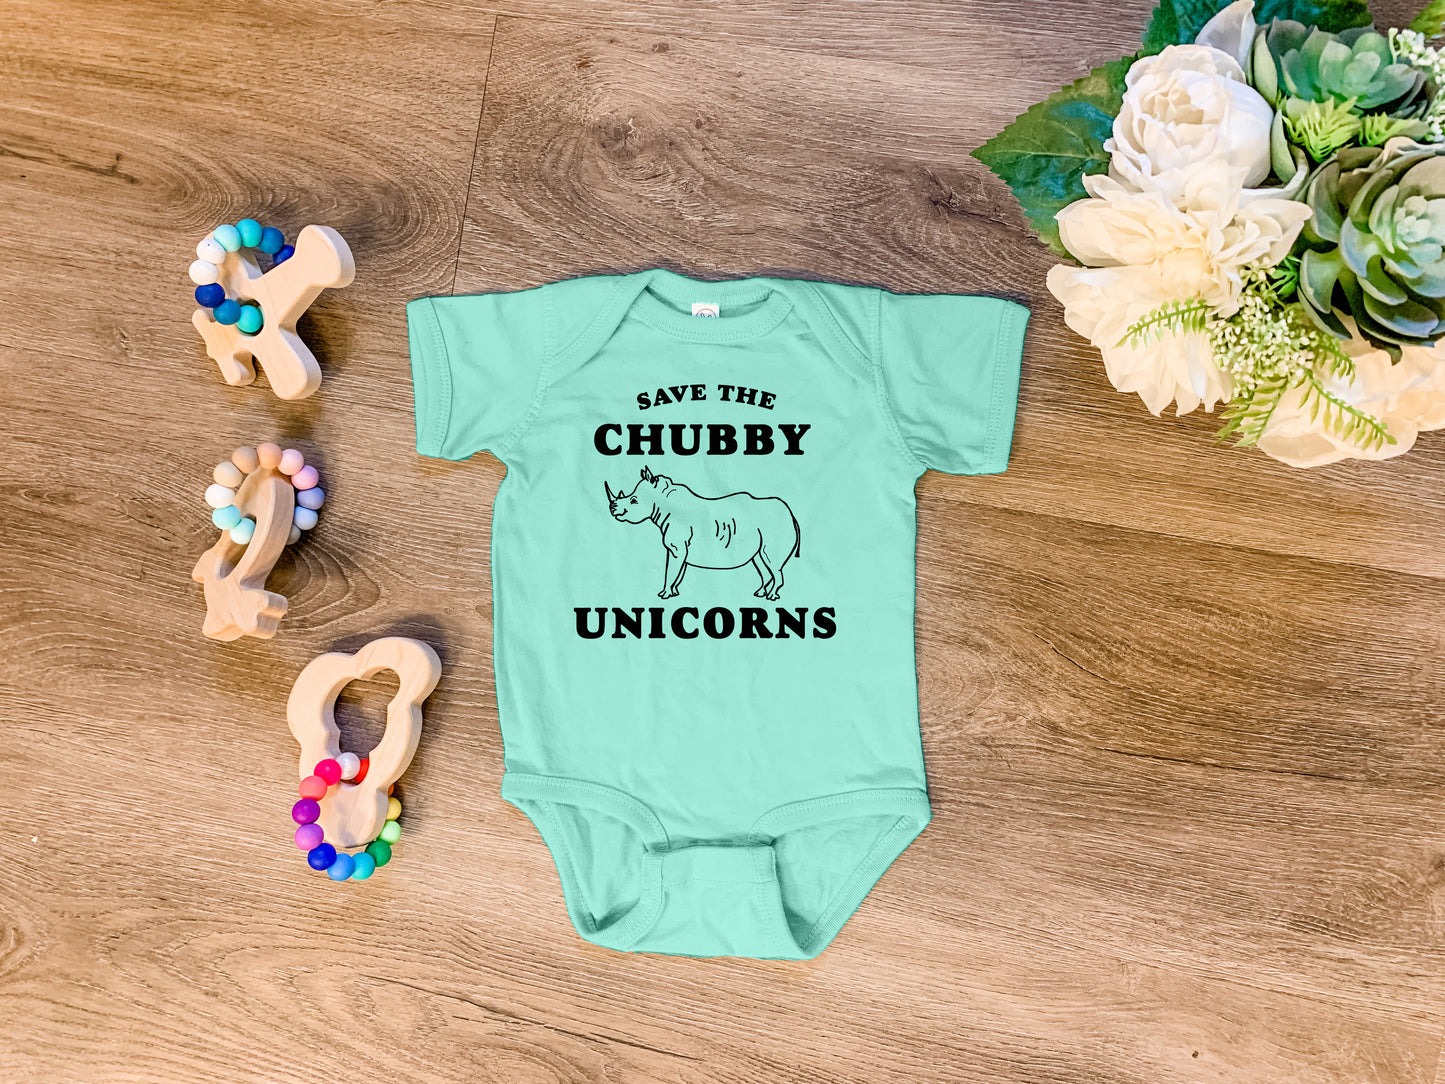 Save The Chubby Unicorns - Onesie - Heather Gray, Chill, or Lavender